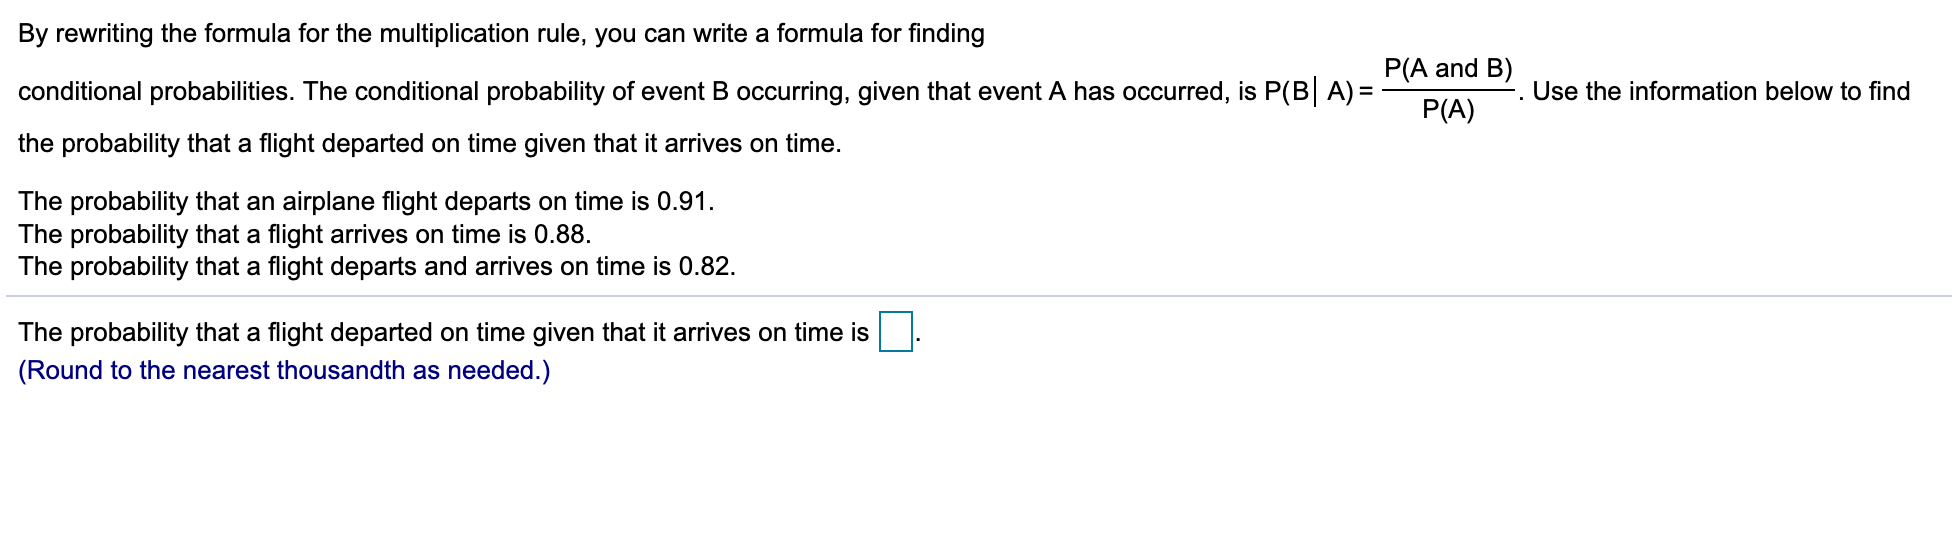 By rewriting the formula for the multiplication rule, you can write a formula for finding
P(A and B)
conditional probabilities. The conditional probability of event B occurring, given that event A has occurred, is P(B A)
Use the information below to find
P(A)
the probability that a flight departed on time given that it arrives on time.
The probability that an airplane flight departs on time is 0.91.
The probability that a flight arrives on time is 0.88
The probability that a flight departs and arrives on time is 0.82.
The probability that a flight departed on time given that it arrives on time is
(Round to the nearest thousandth as needed.)
